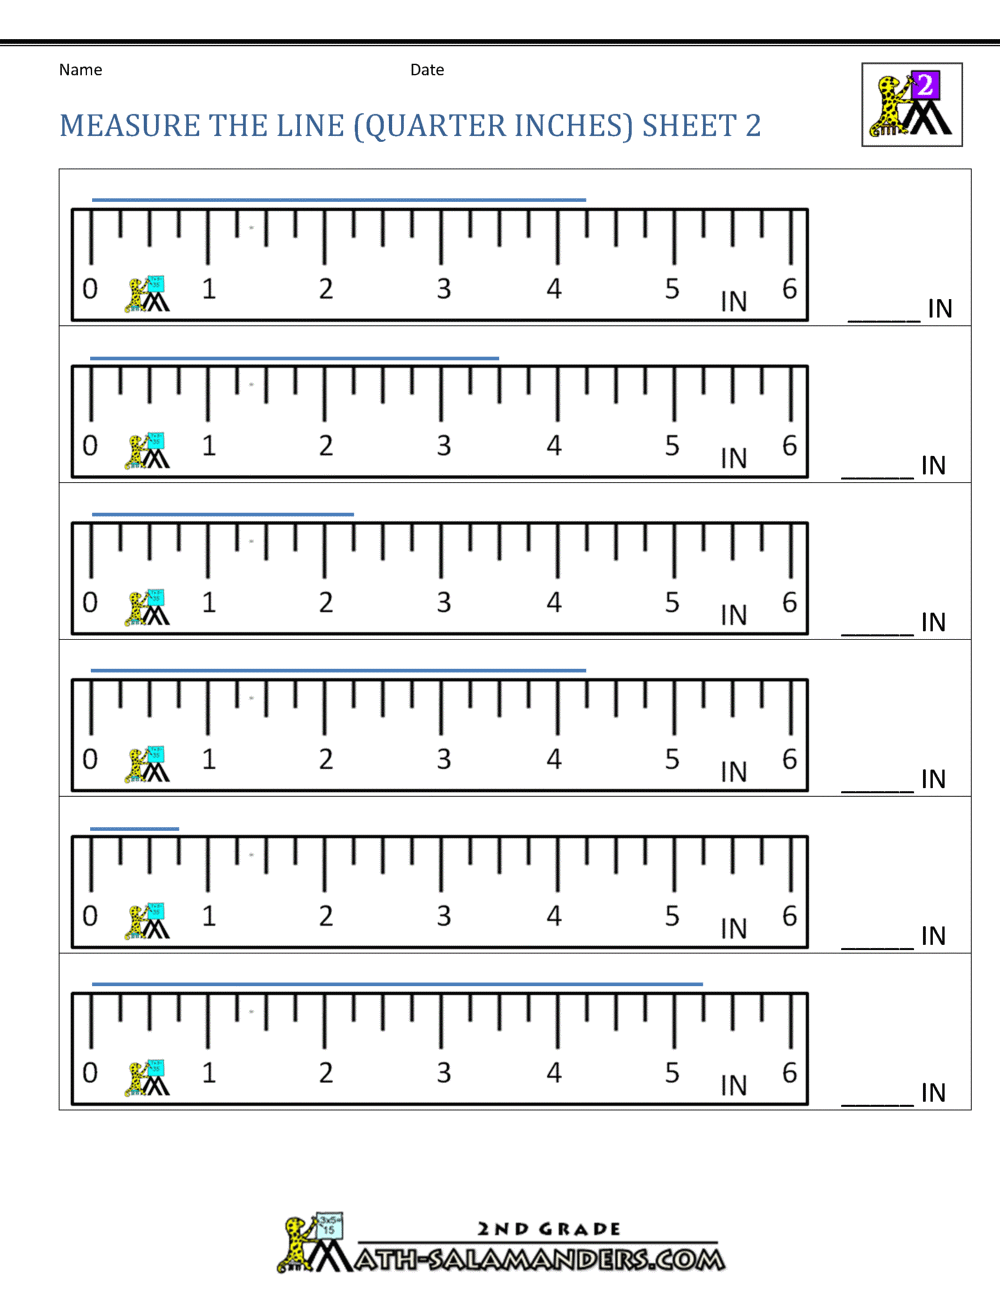 free ruler learning activity